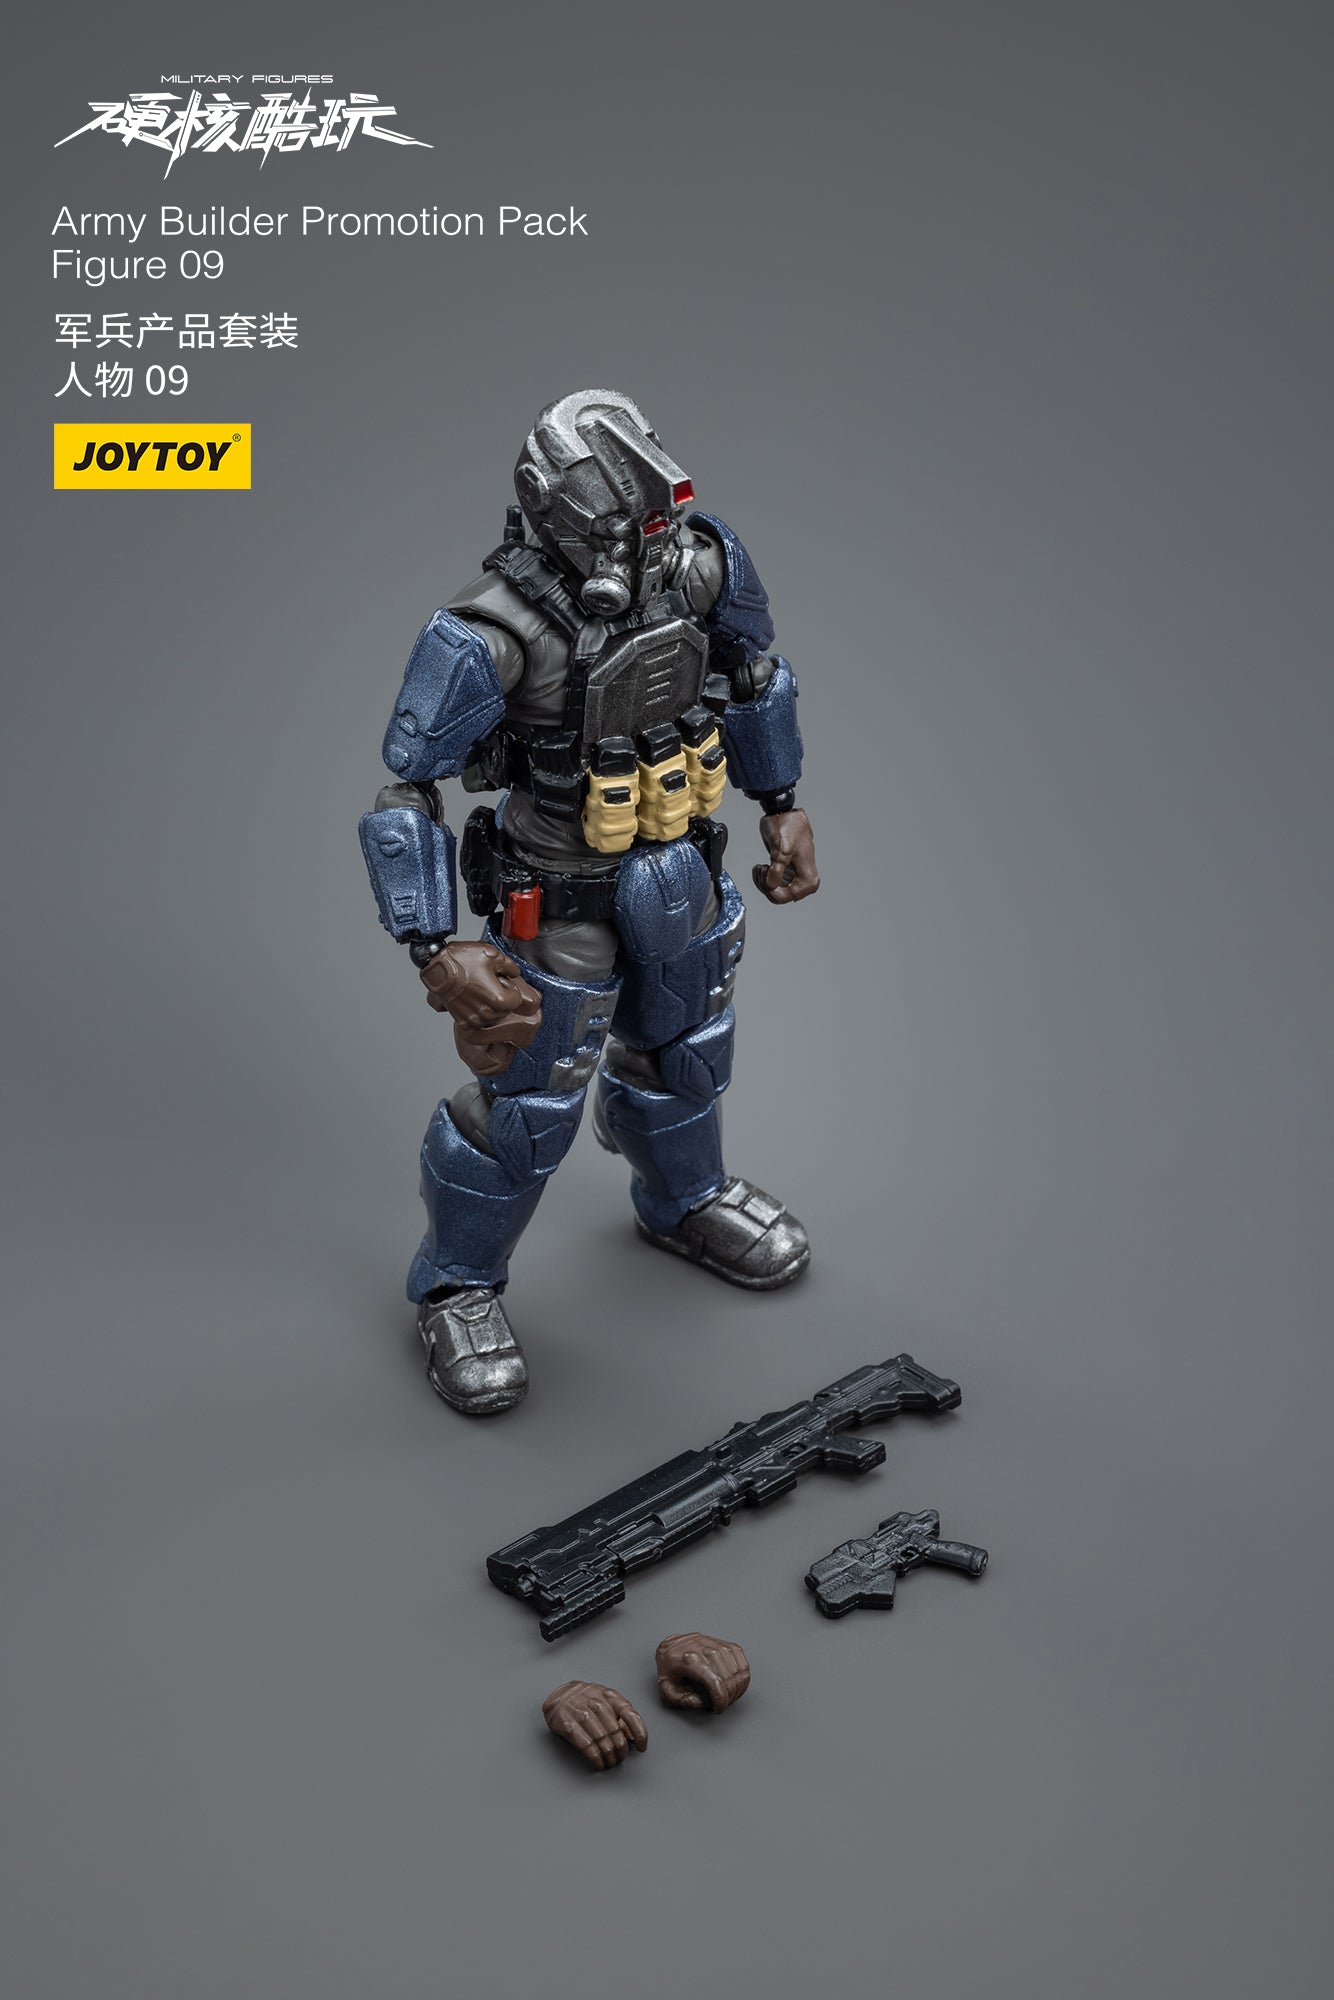 Army Builder Promotion Pack Figure 09 - Military Action Figure By JOYTOY